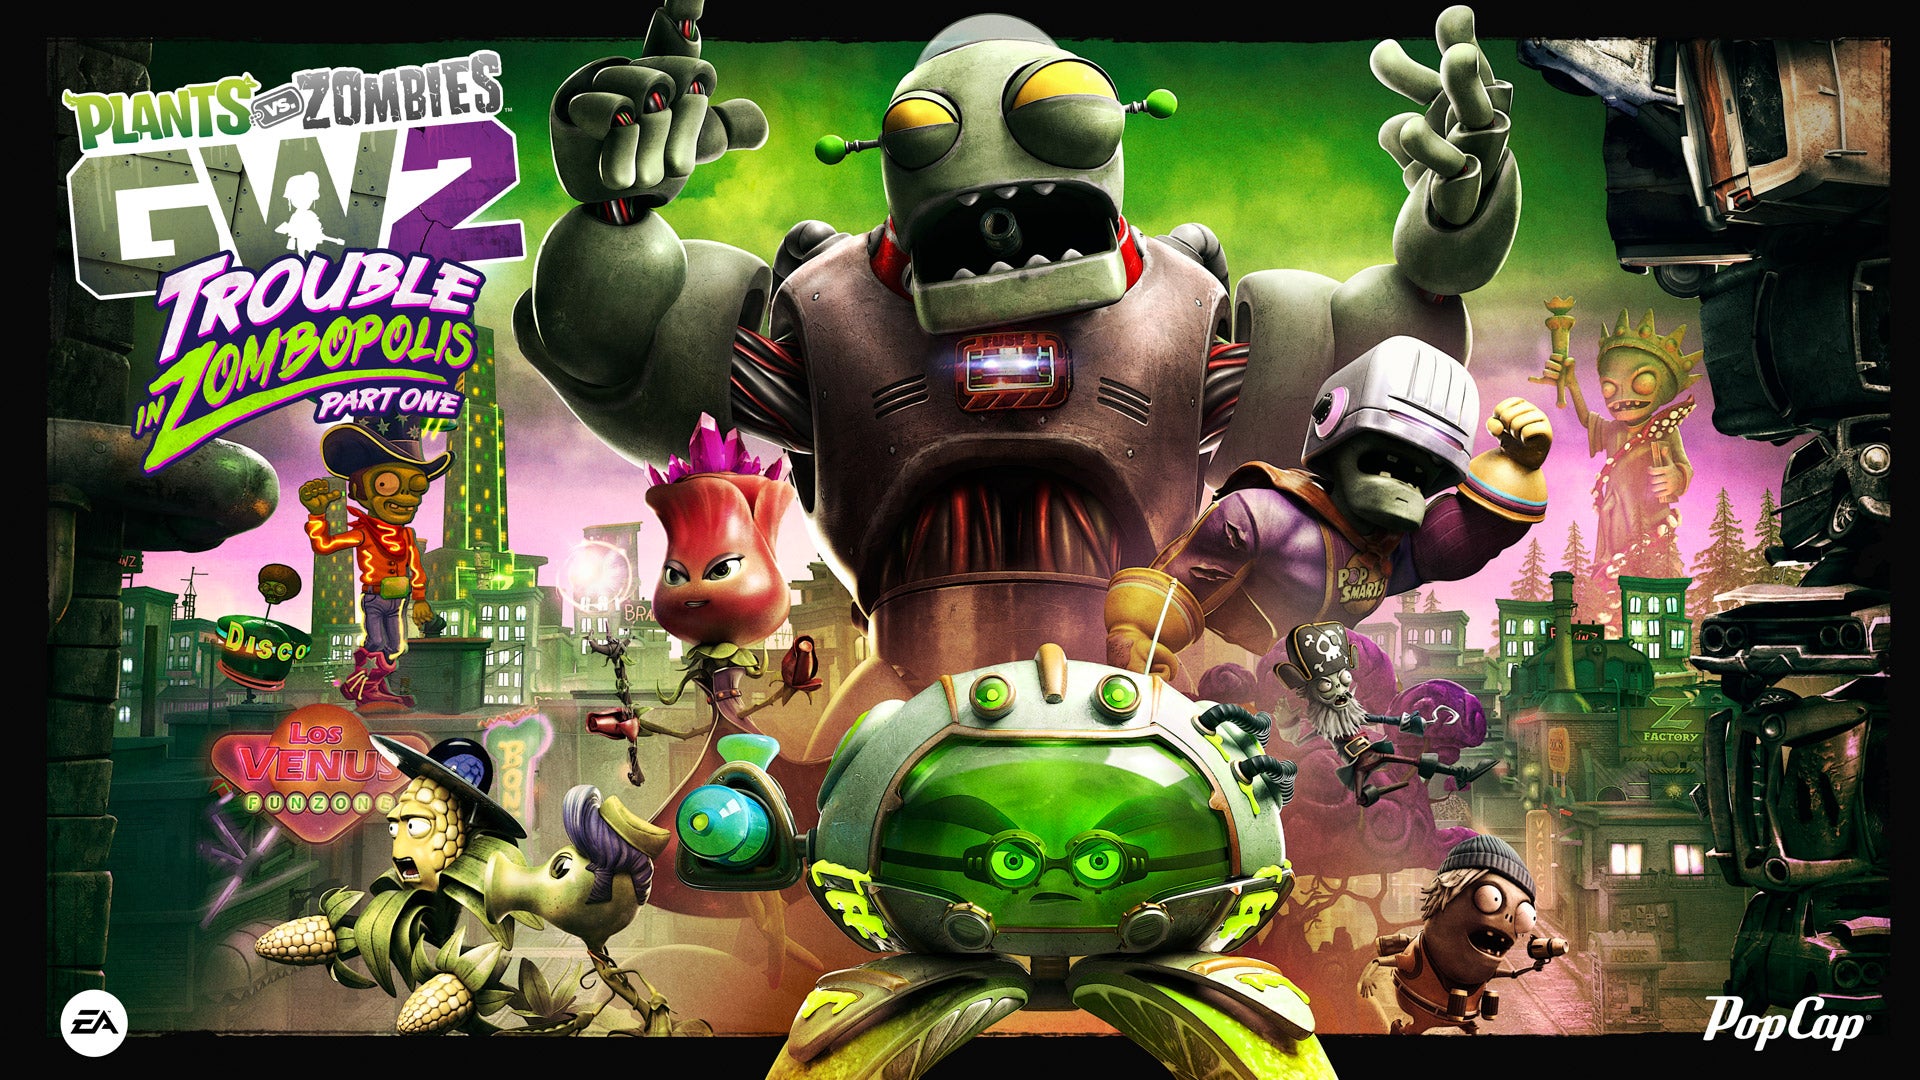 Image for Plants vs Zombies: Garden Warfare 2's first big summer update detailed